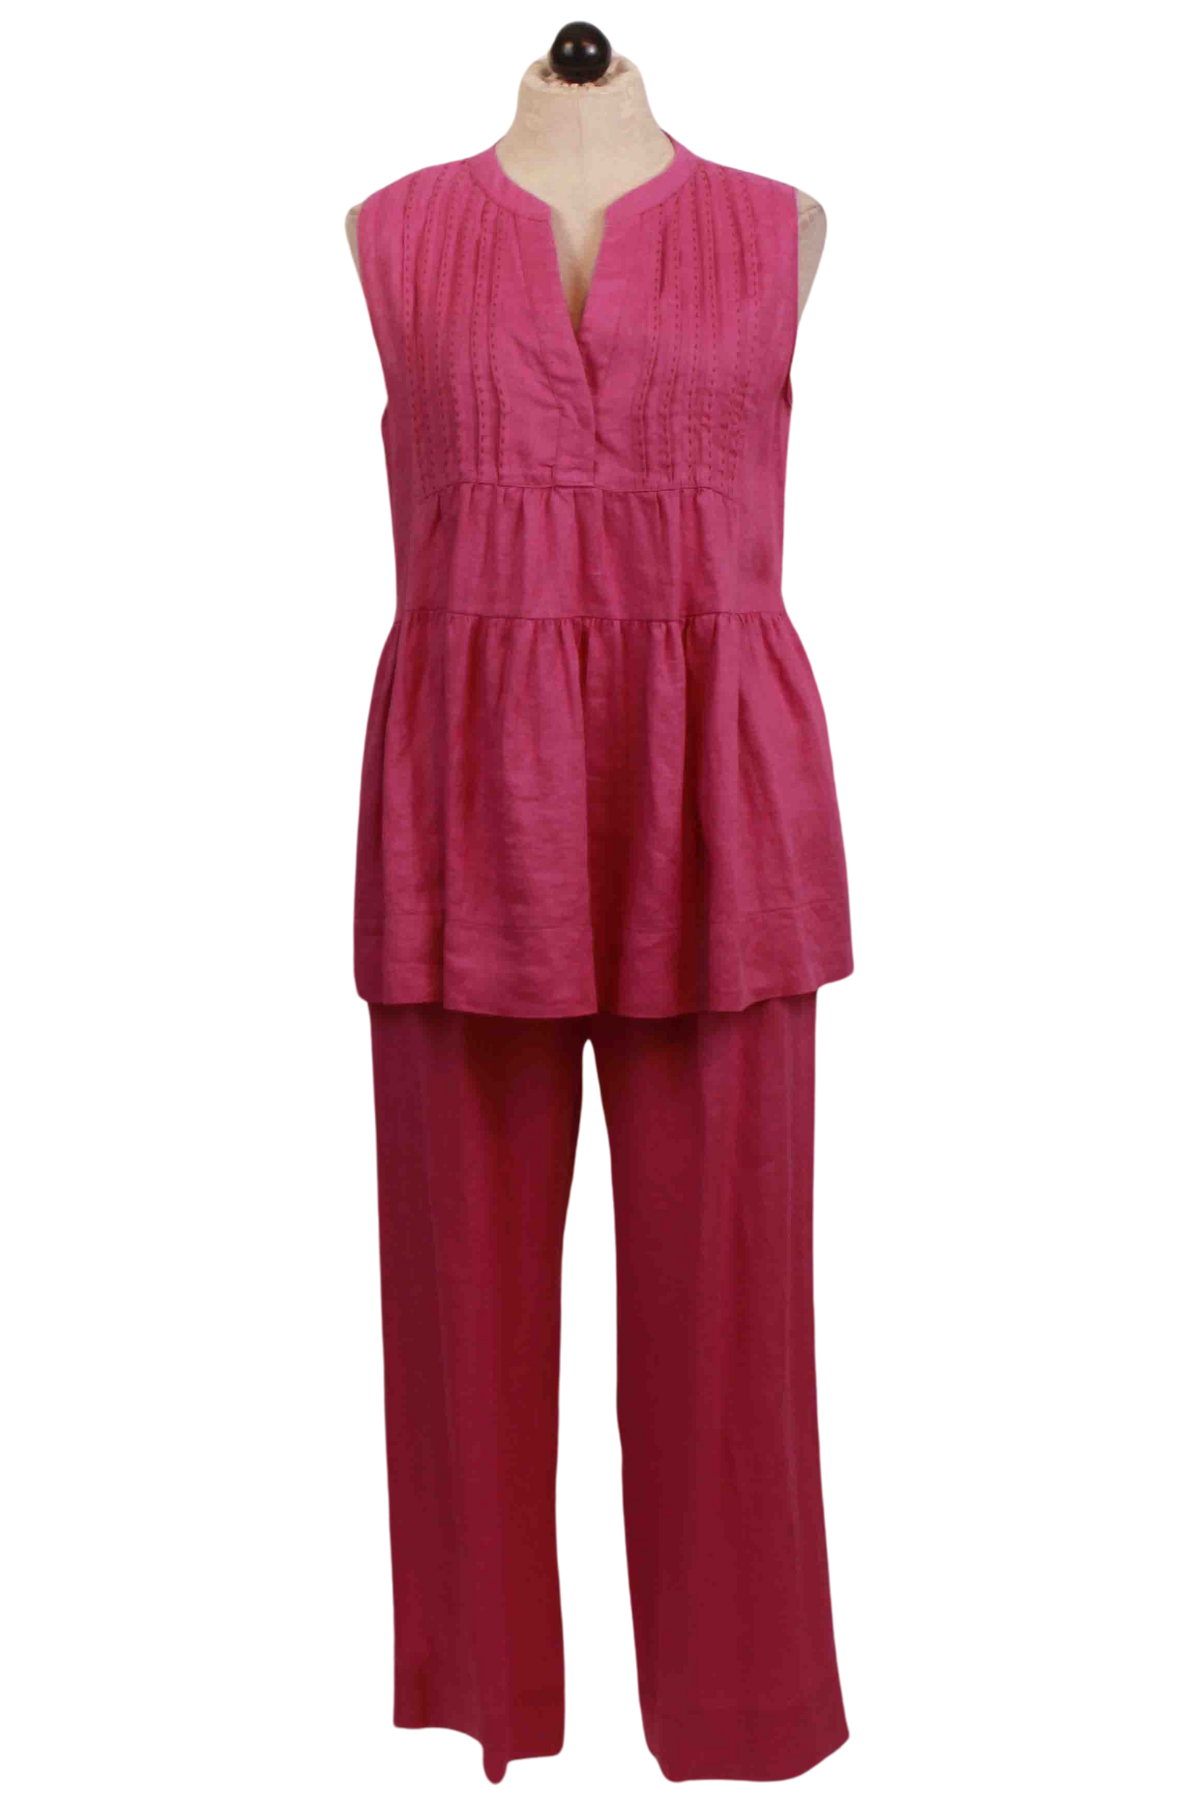 Fuschia Anthemis Linen Sleeveless Top by Devotion Twins paired with the matching fuschia linen pants by Devotion Twins